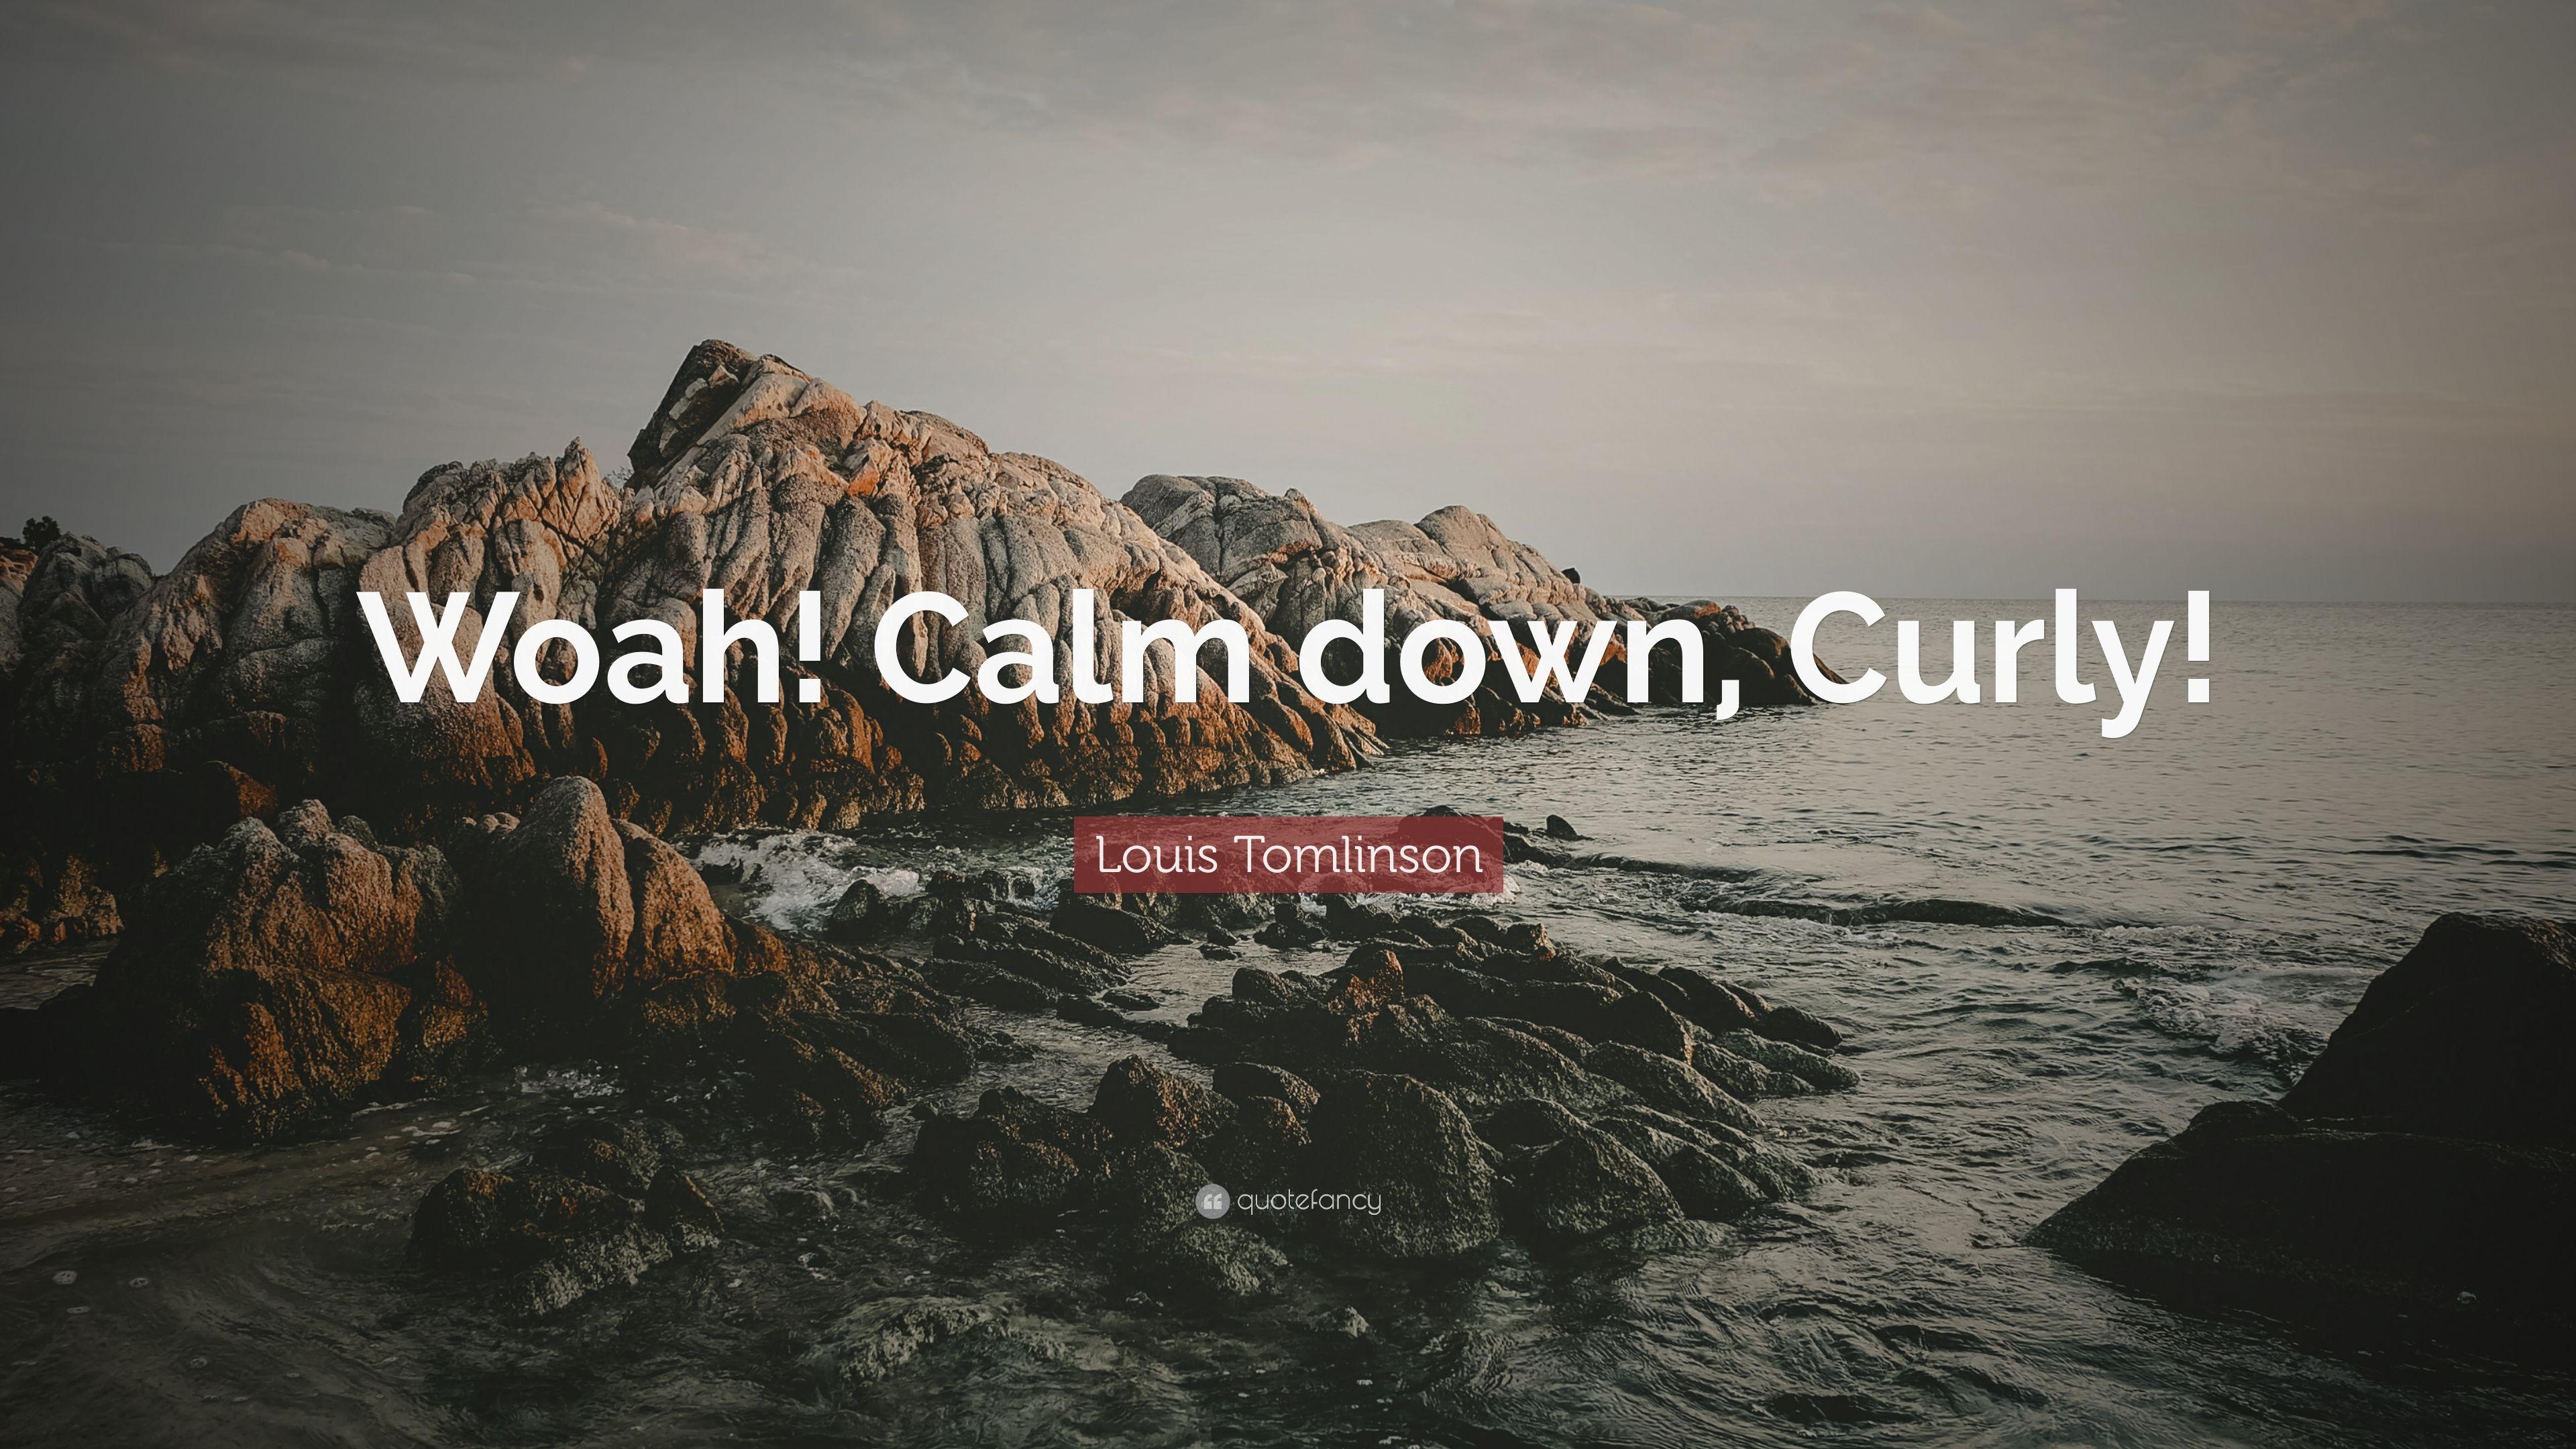 Louis Tomlinson Quote: “Woah! Calm down, Curly!” 7